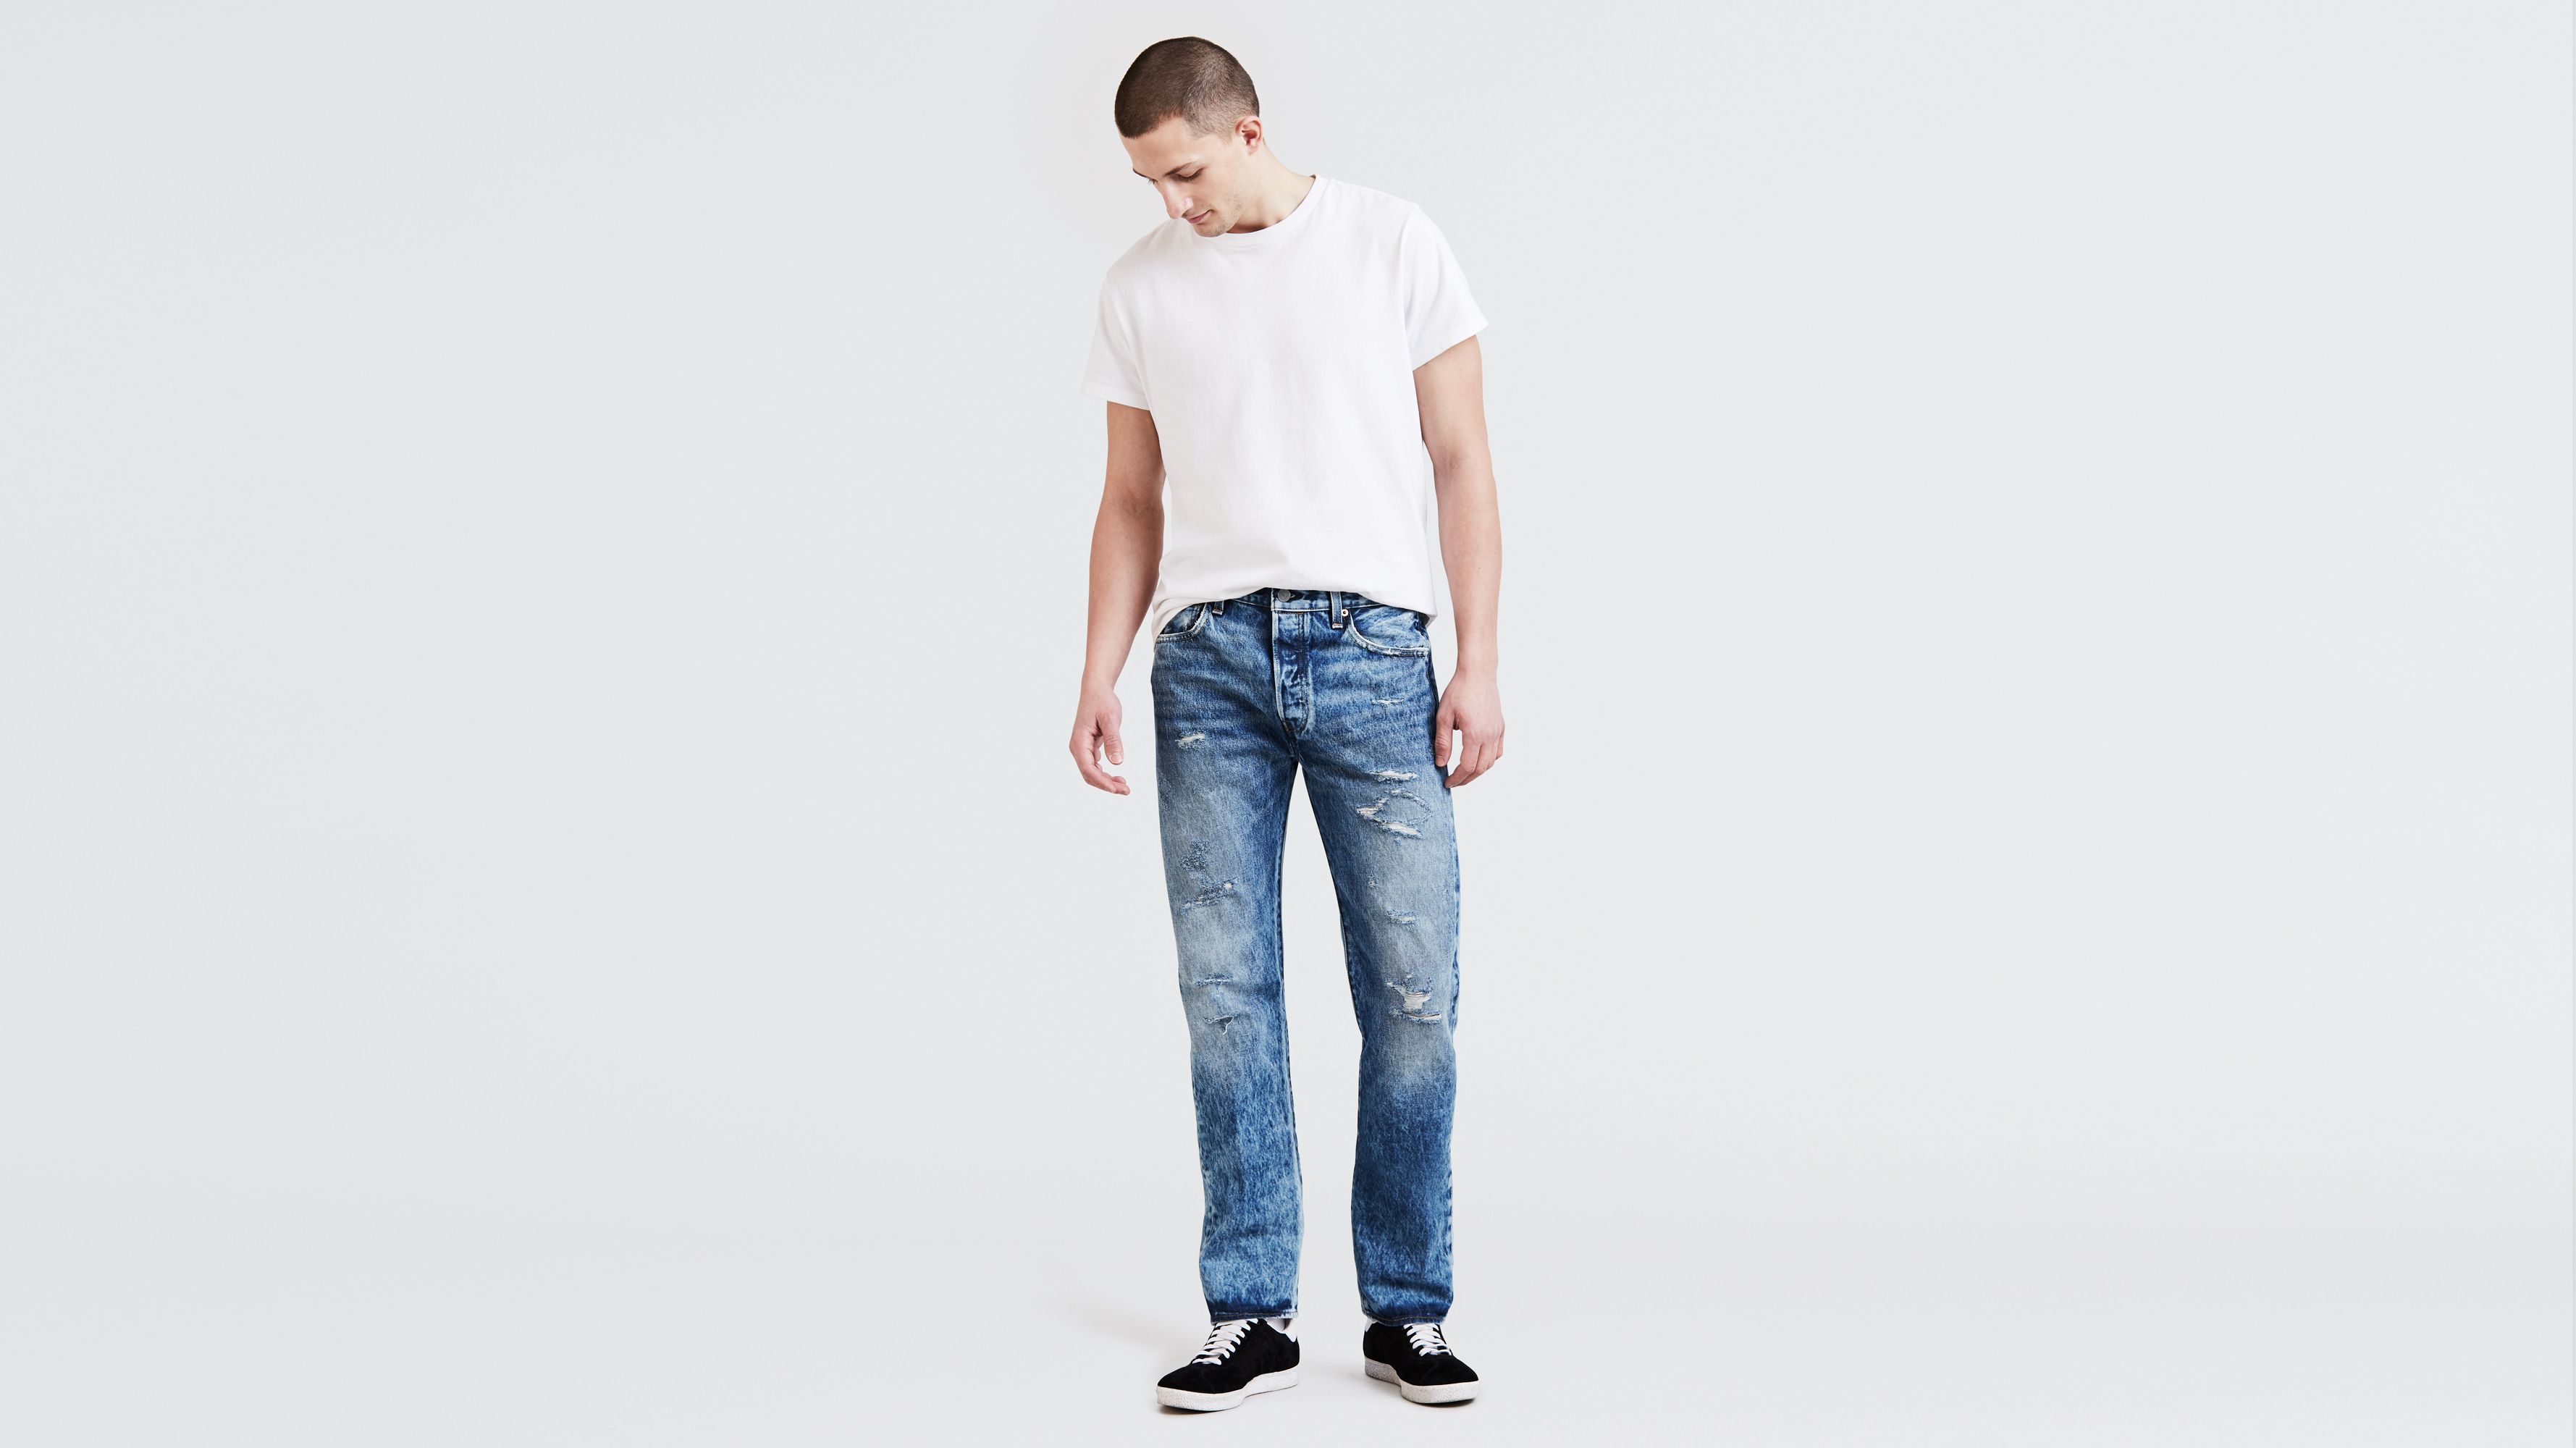 levi's rugged jeans